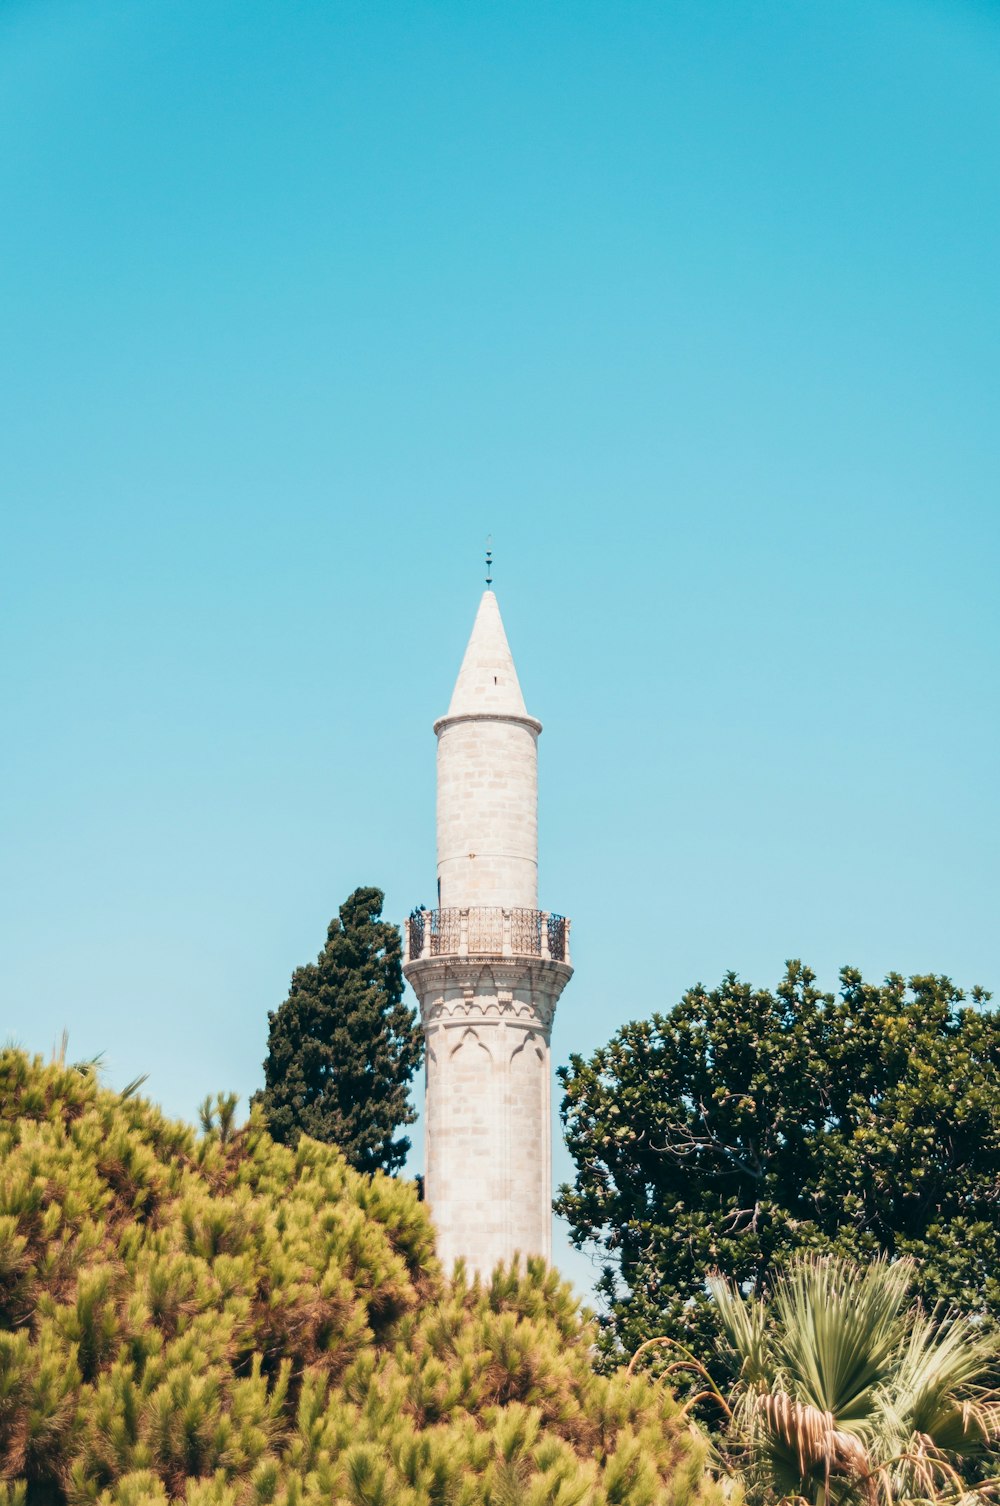 white concrete tower under blue sky during daytime